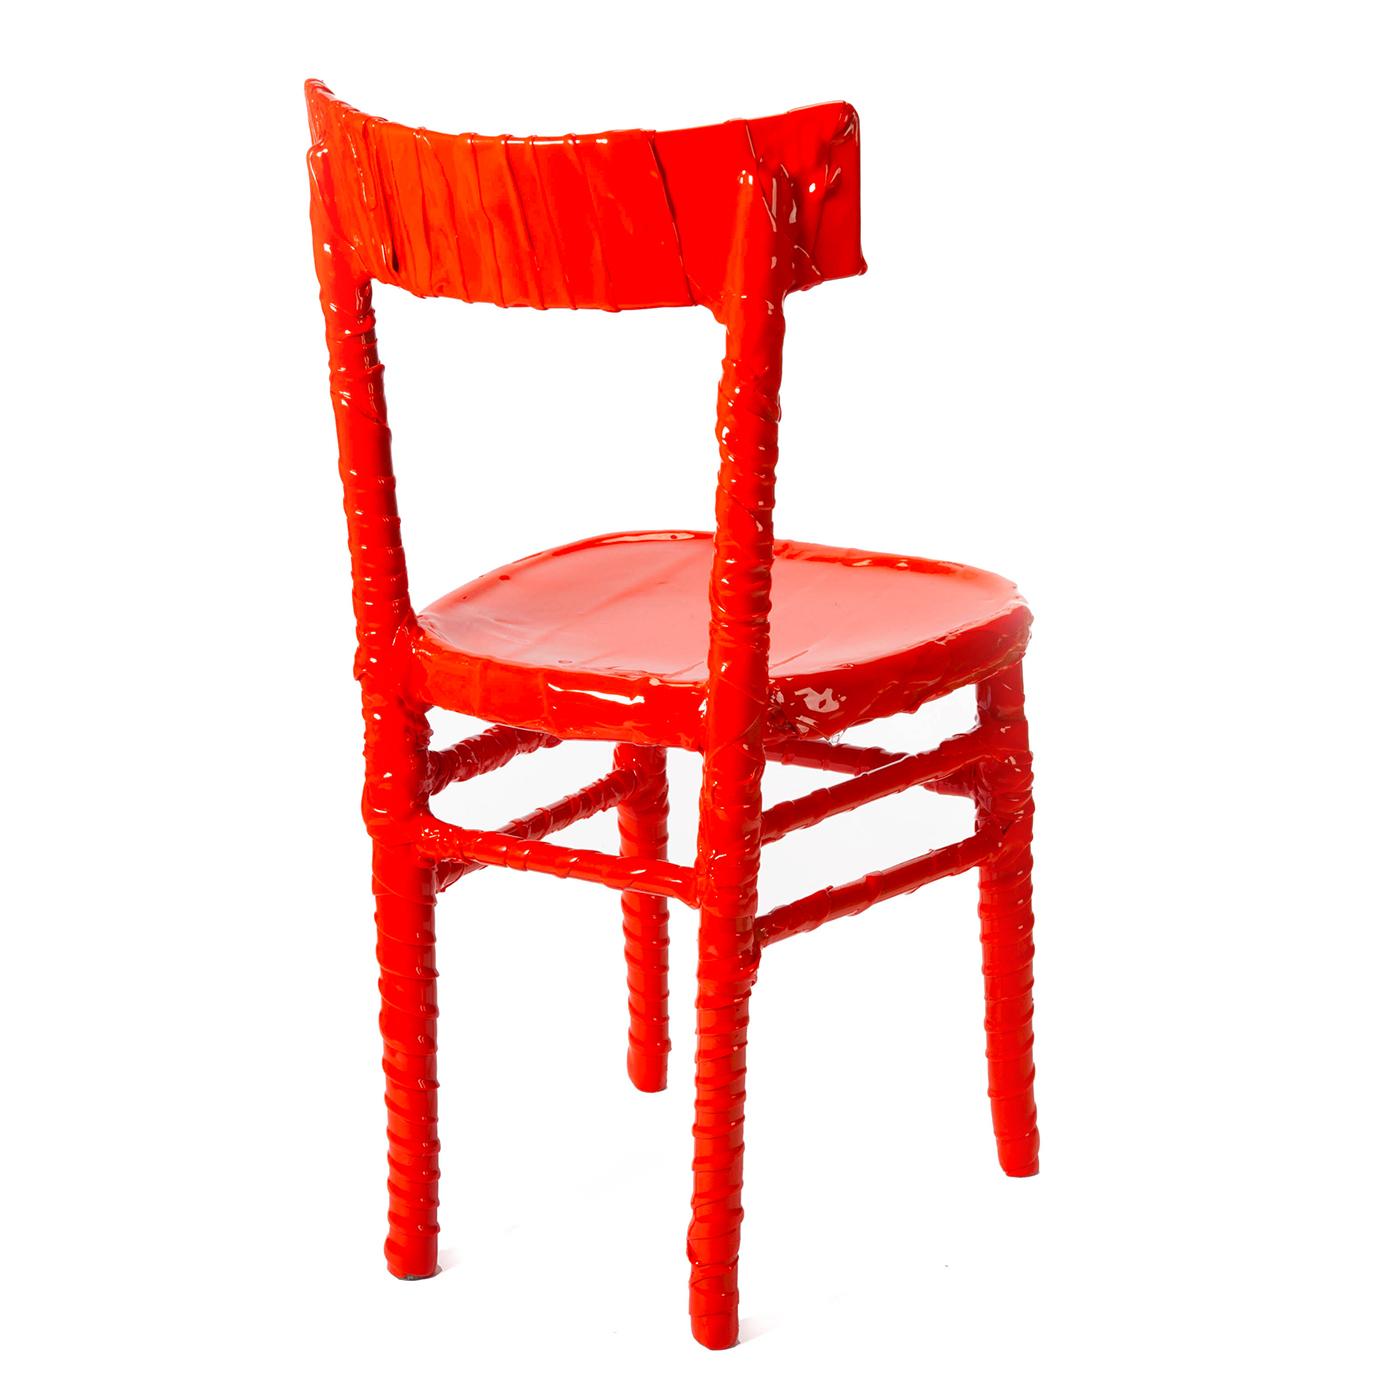 Designed by Paola Navona in 2019, this upcycled chair is part of the One-Off Collection. The chair, once abandoned, has been given a new life and coated in bright orange resin by the expert artisans of Corsi Design Factory. No two pieces are exactly